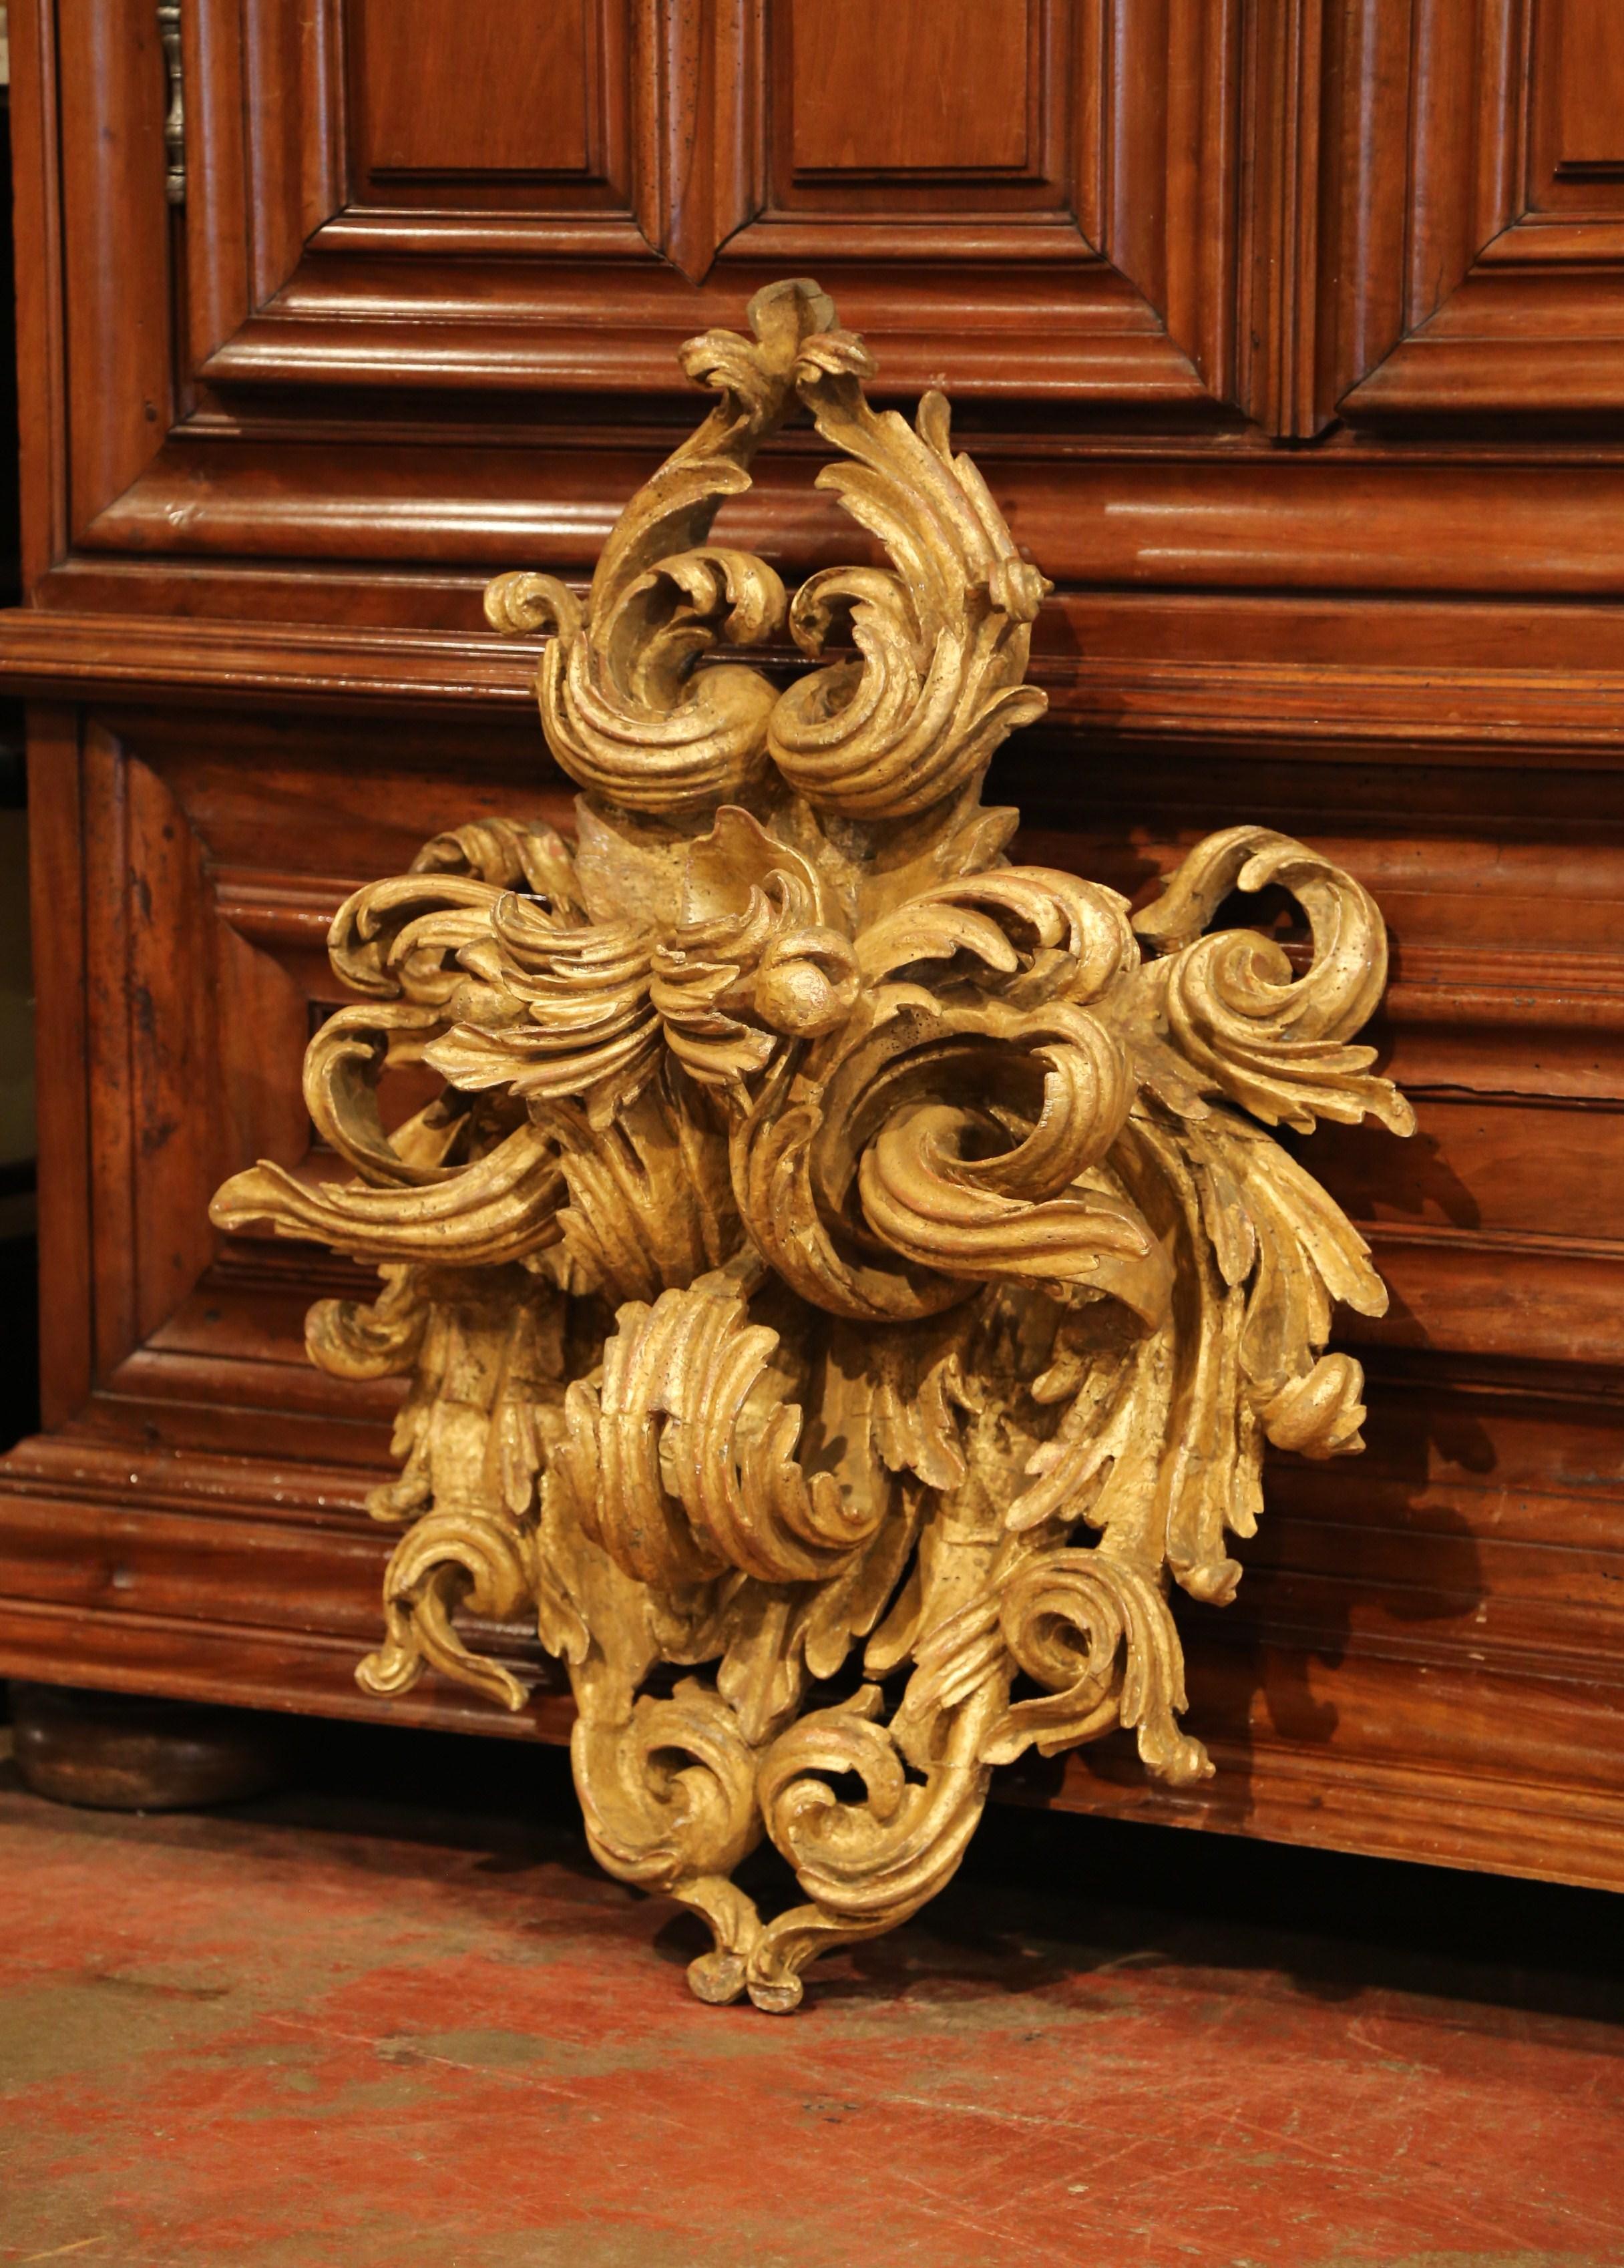 Embellish a mantel with this important antique wood carving sculpture. Crafted in France, circa 1870, the elegant wall-mounted plaque features exquisite carved scrolls embellished with acanthus leaf decor. The large ornament is in excellent